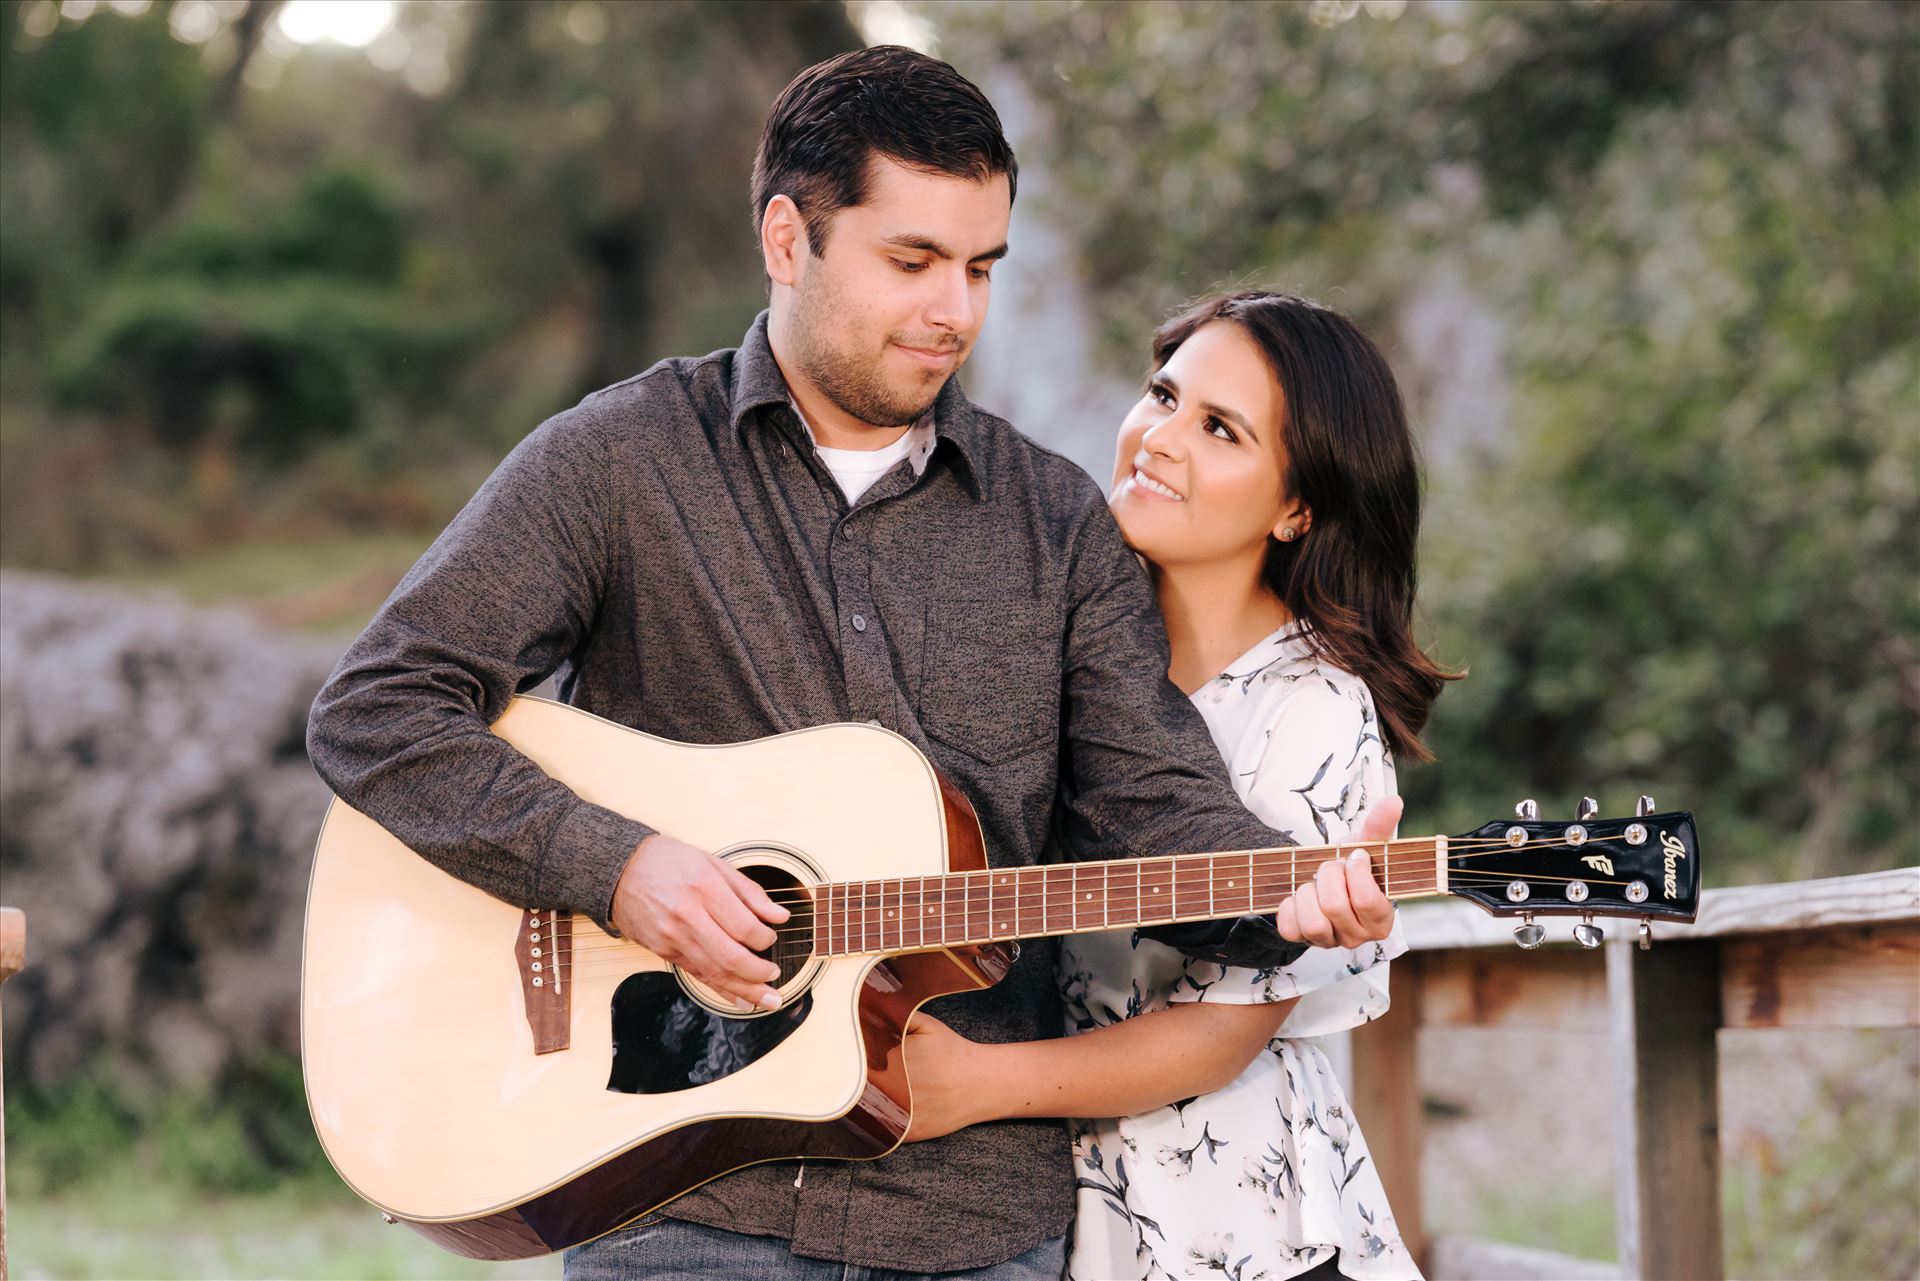 DSC_6898.JPG Mirror's Edge Photography captures CiCi and Rocky's Sunrise Engagement in Los Osos California at Los Osos Oaks Reserve. Guitarist engagement photography by Sarah Williams